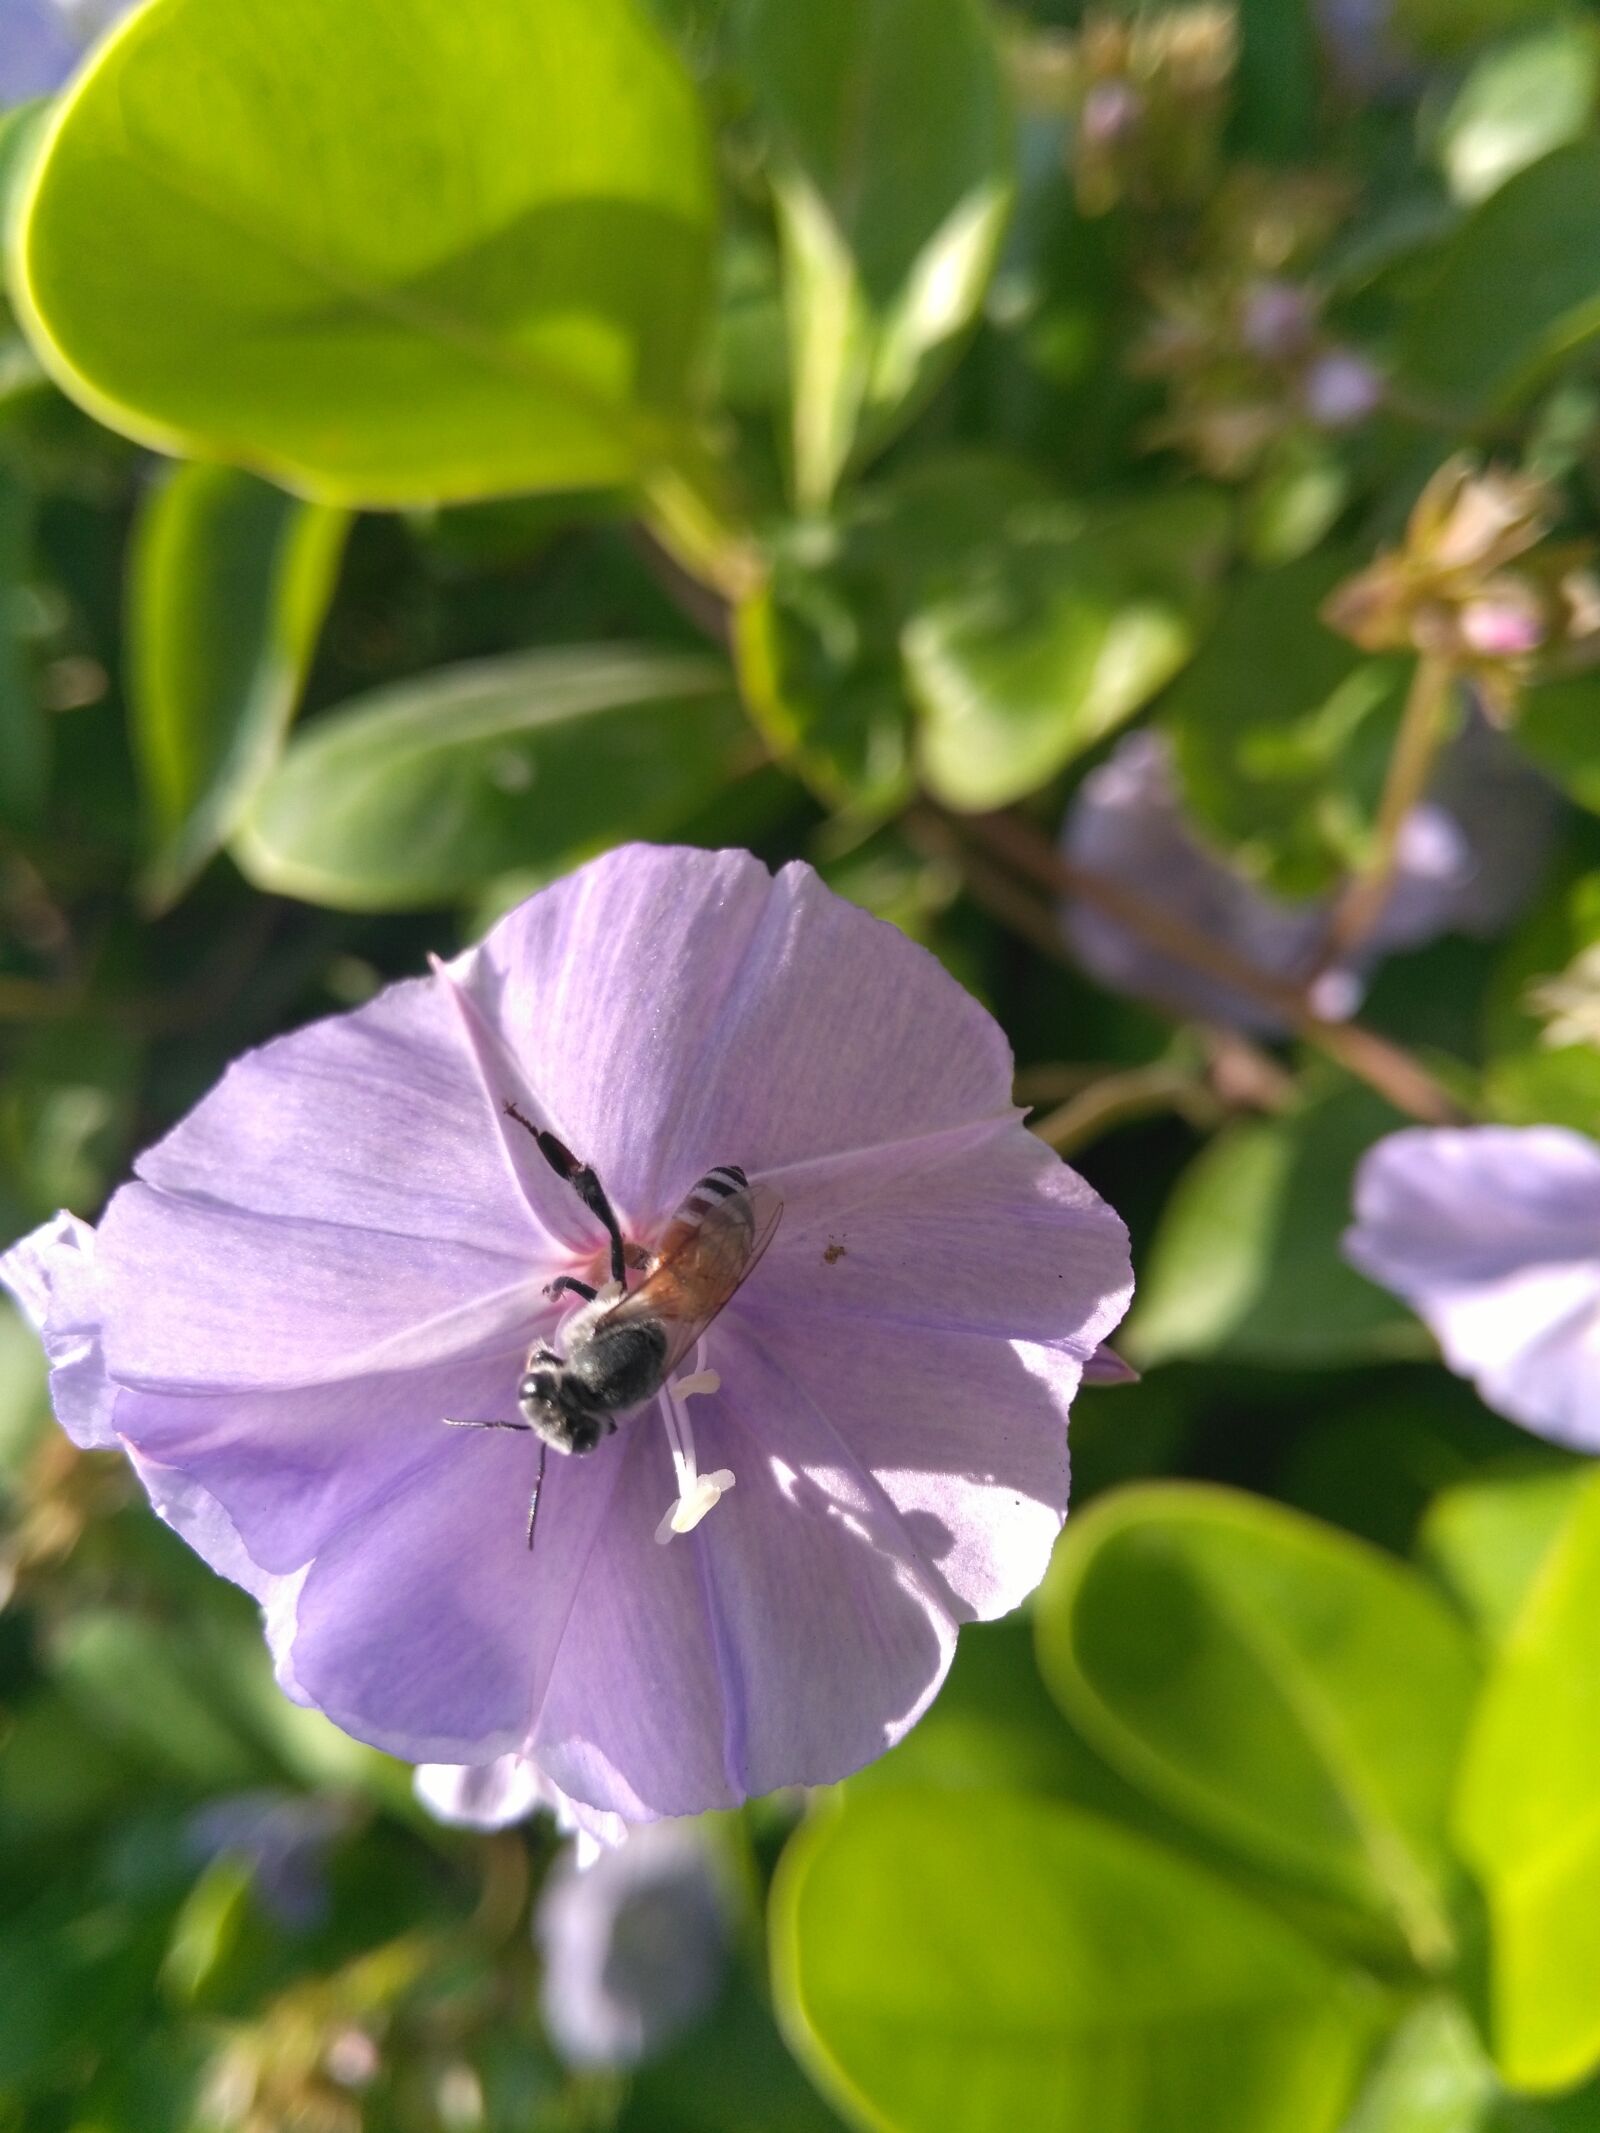 HUAWEI Honor 5X sample photo. Flowers, honey bee, natural photography